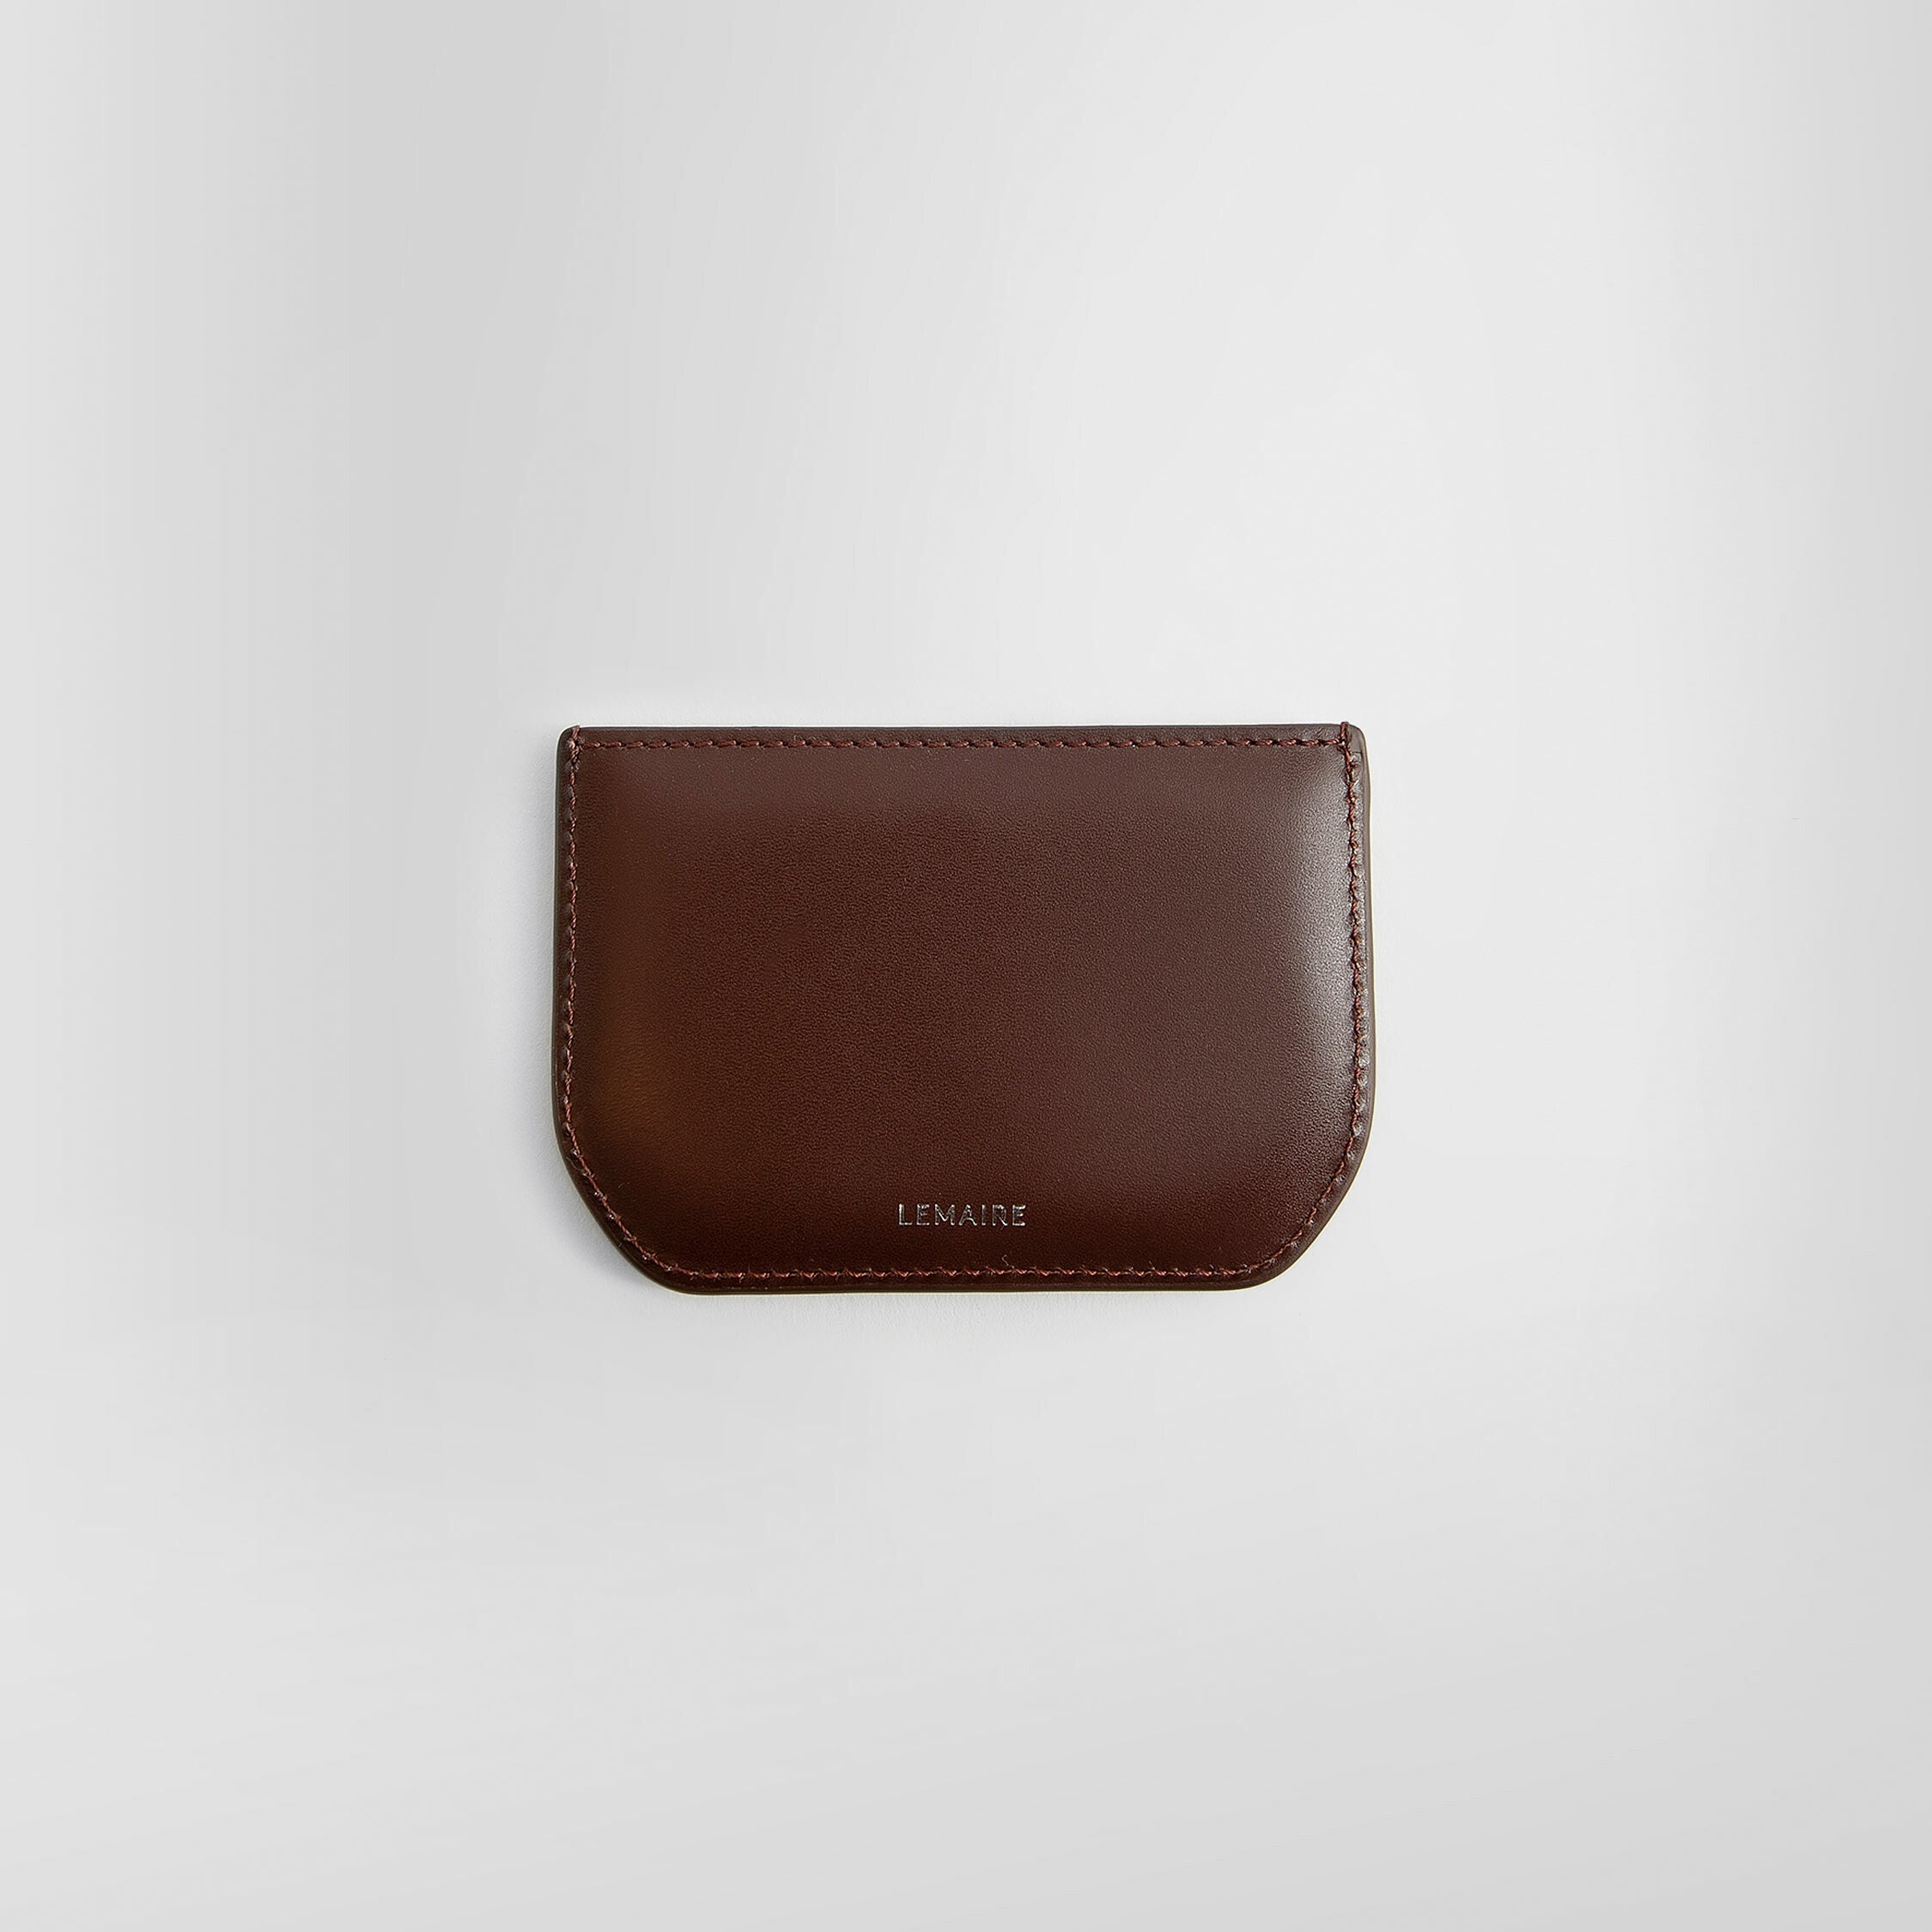 LEMAIRE UNISEX BROWN WALLETS & CARDHOLDERS - 4